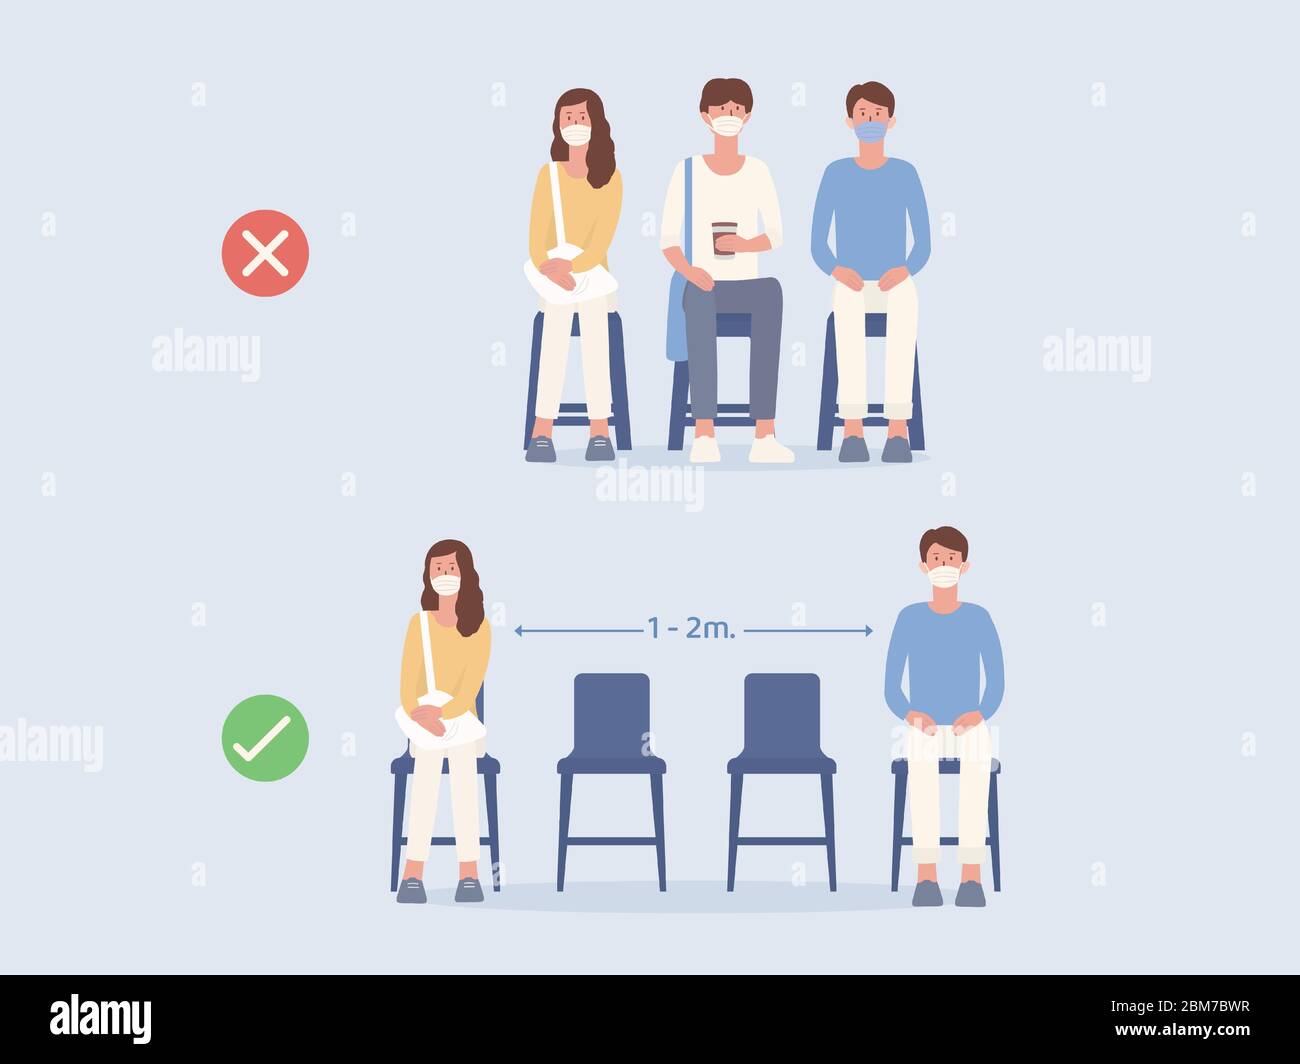 Correct and wrong way to Social Distancing by Sitting of peoples in community.Illustration about virus spreading. Stock Vector